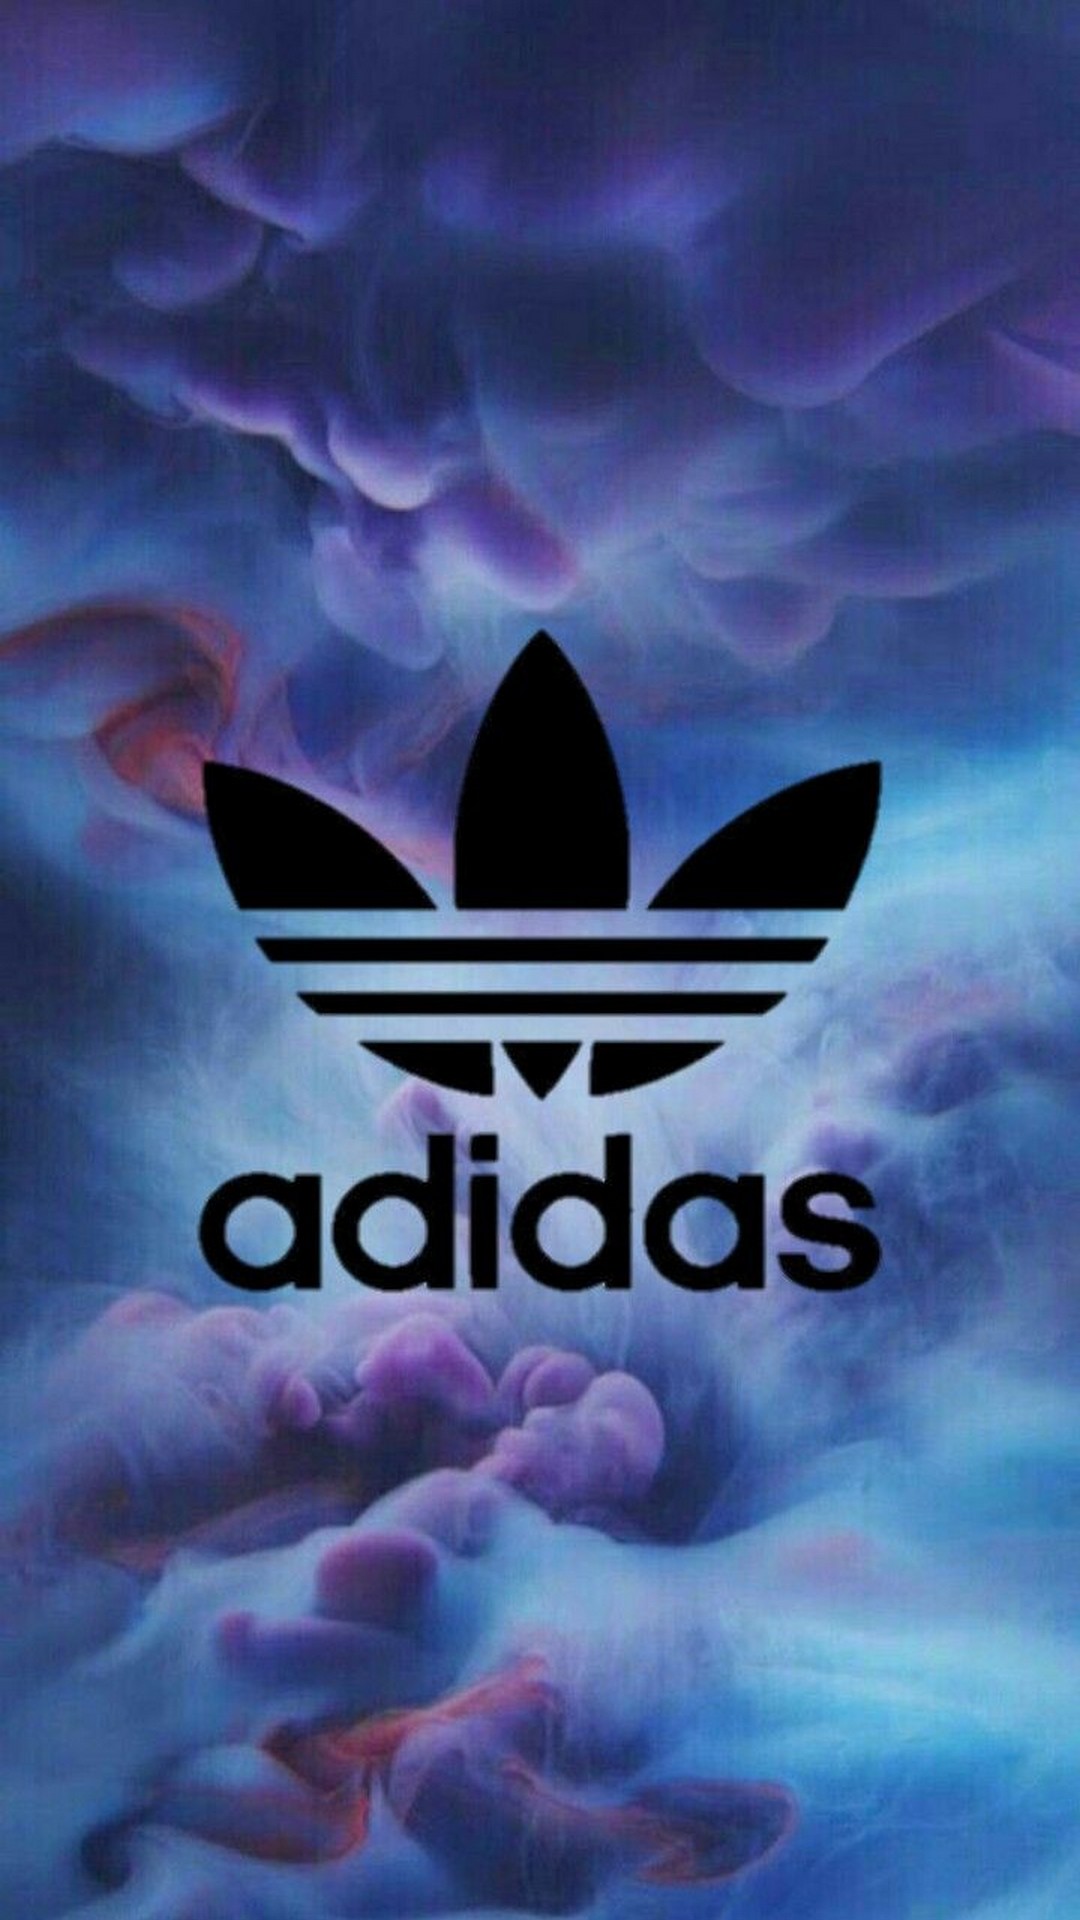 Buy > cool adidas backgrounds > in stock